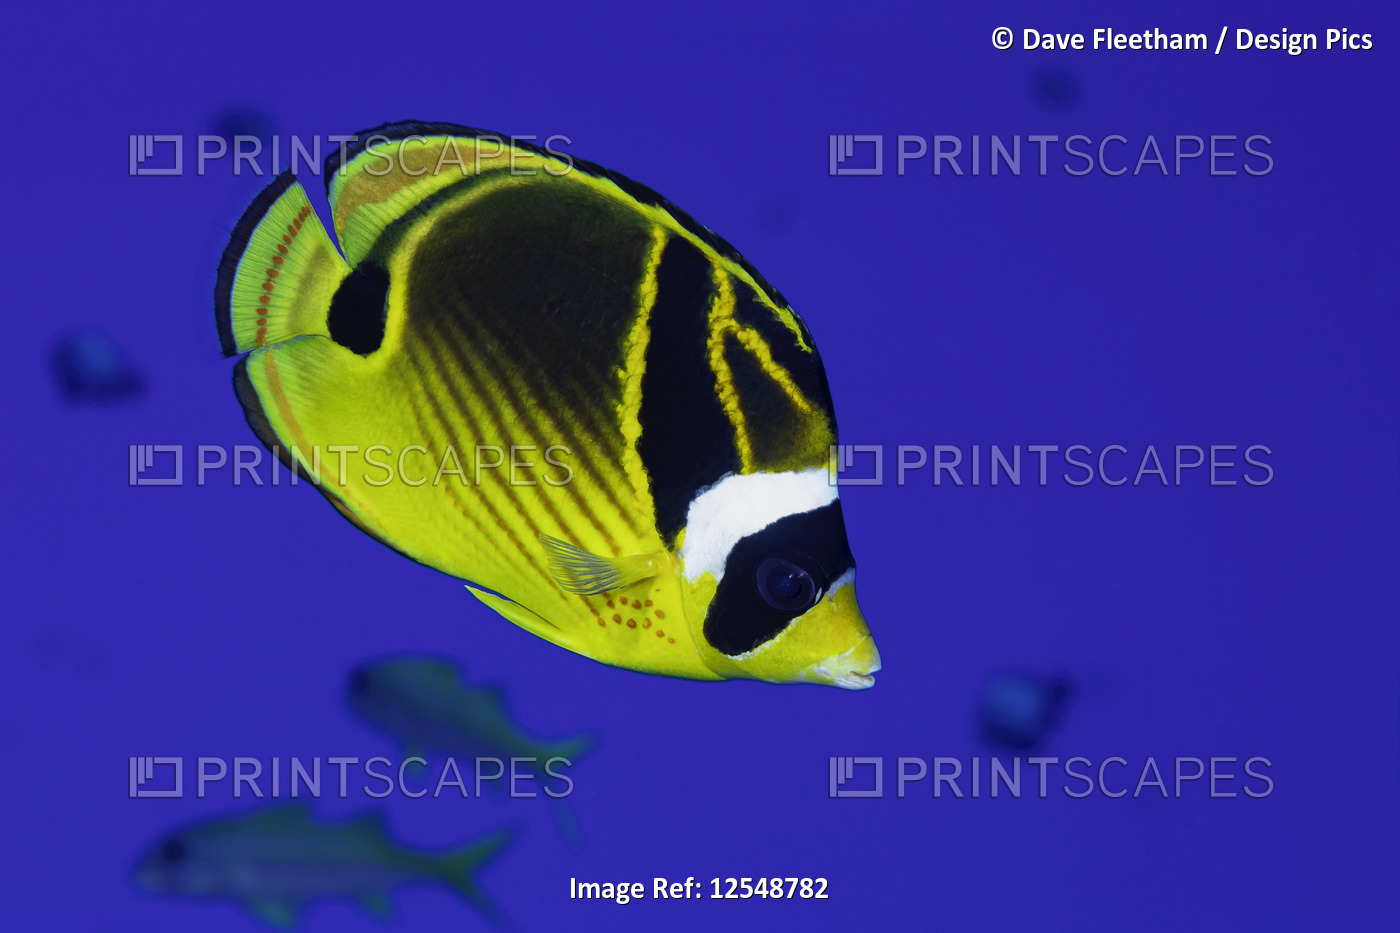 Raccoon butterflyfish (Chaetodon lunula) are often found in large schools; ...